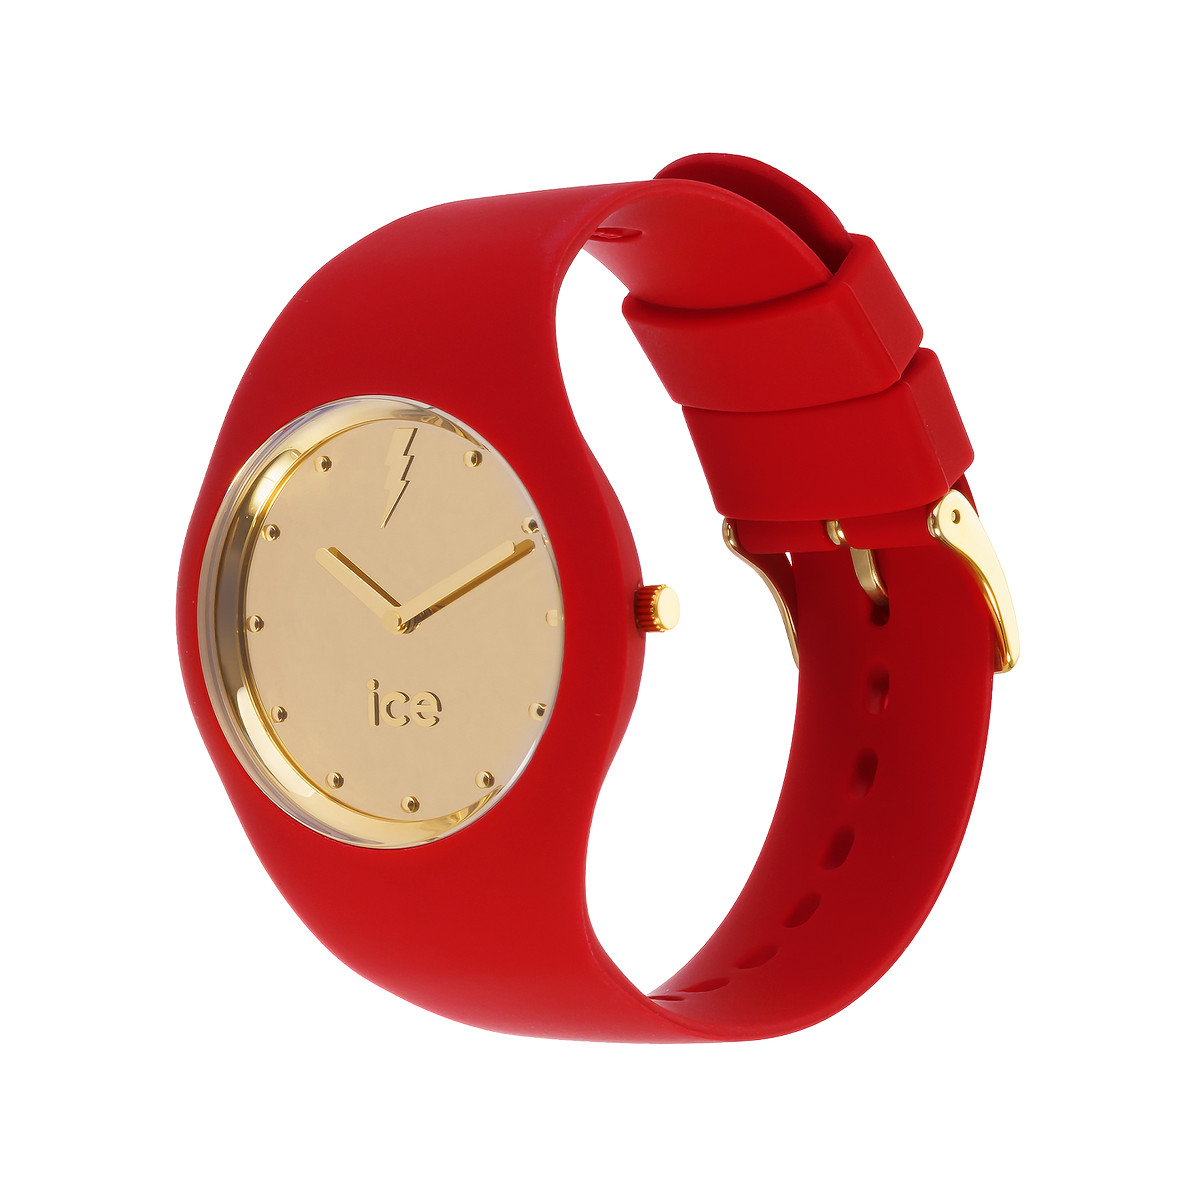 Montre Ice Watch  Femme silicone rouge. - vue 2